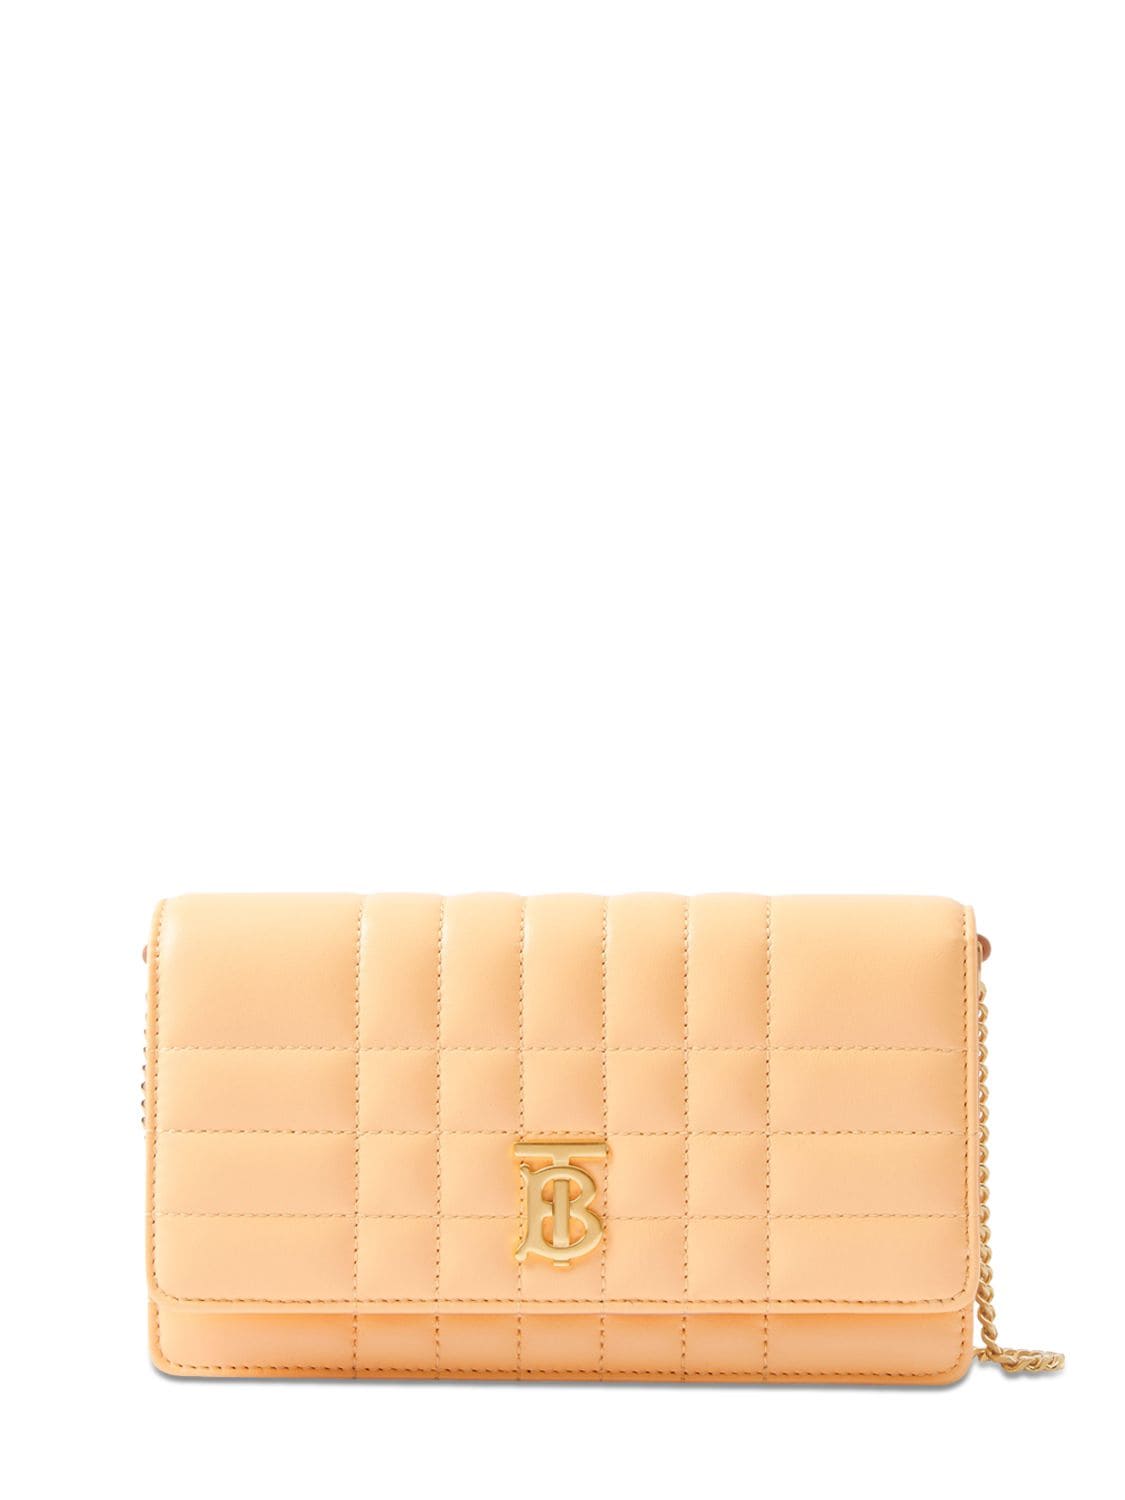 Burberry Lola Quilted Leather Clutch In Golde Sand